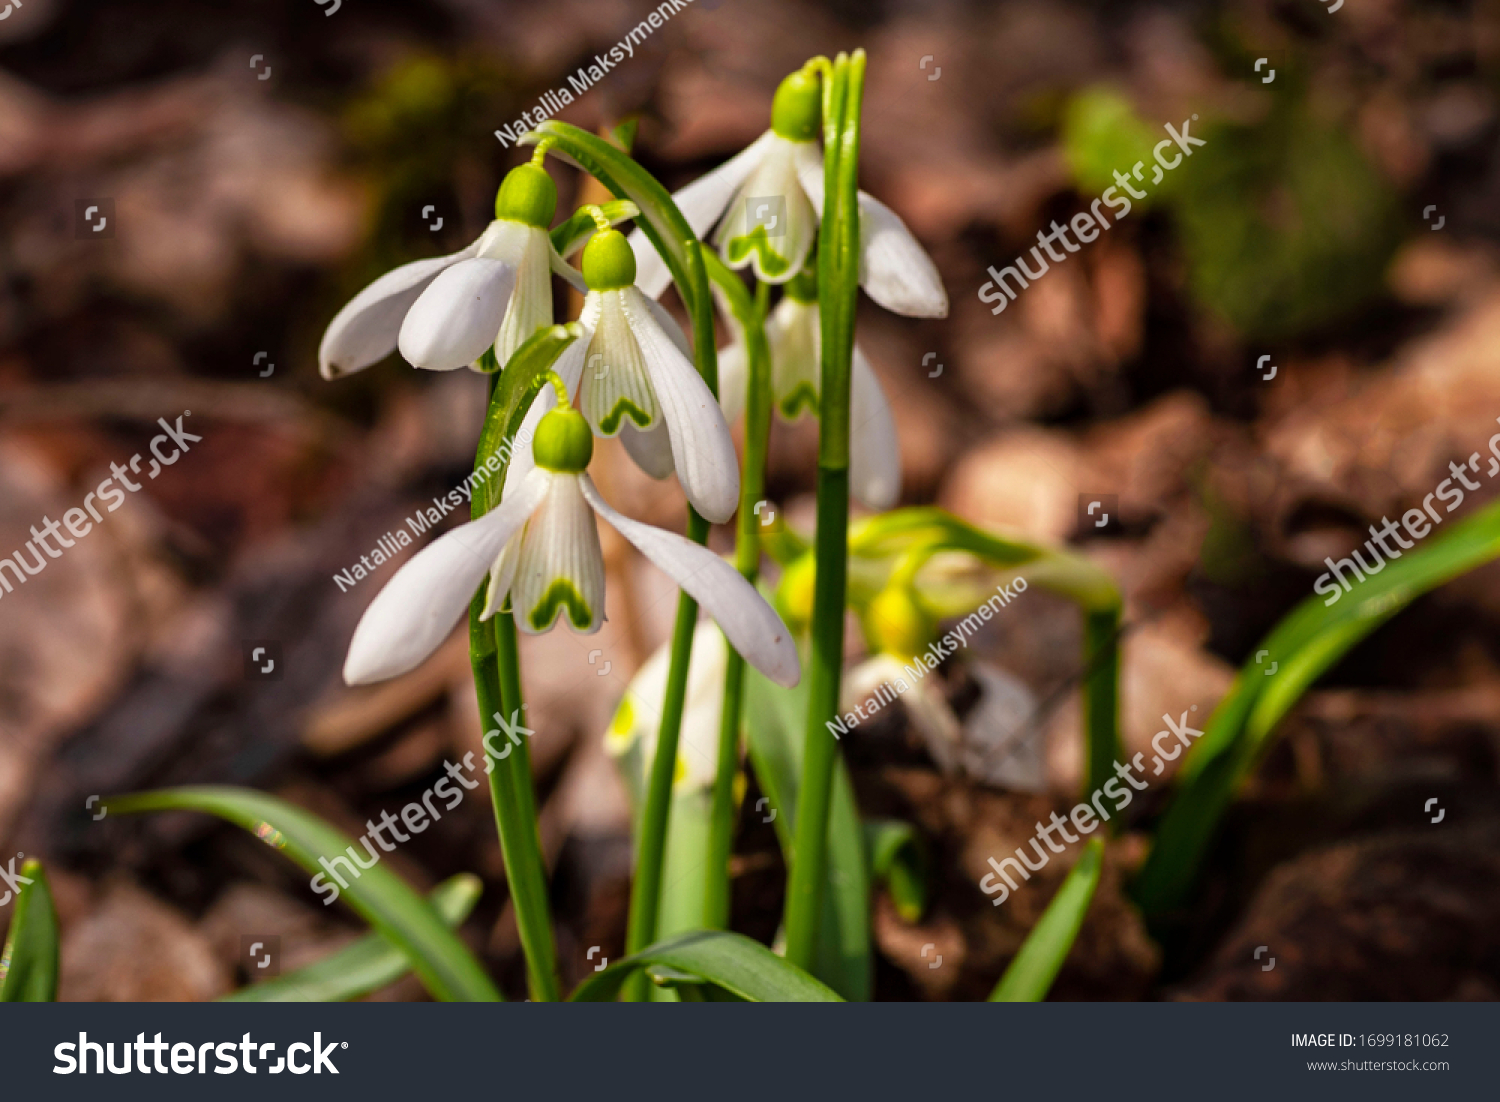 White snowdrop .Snowdrop spring flowers. Galanthis in early spring gardens. Delicate Snowdrop flower is one of the spring symbols .The first early snowdrop flower. #1699181062